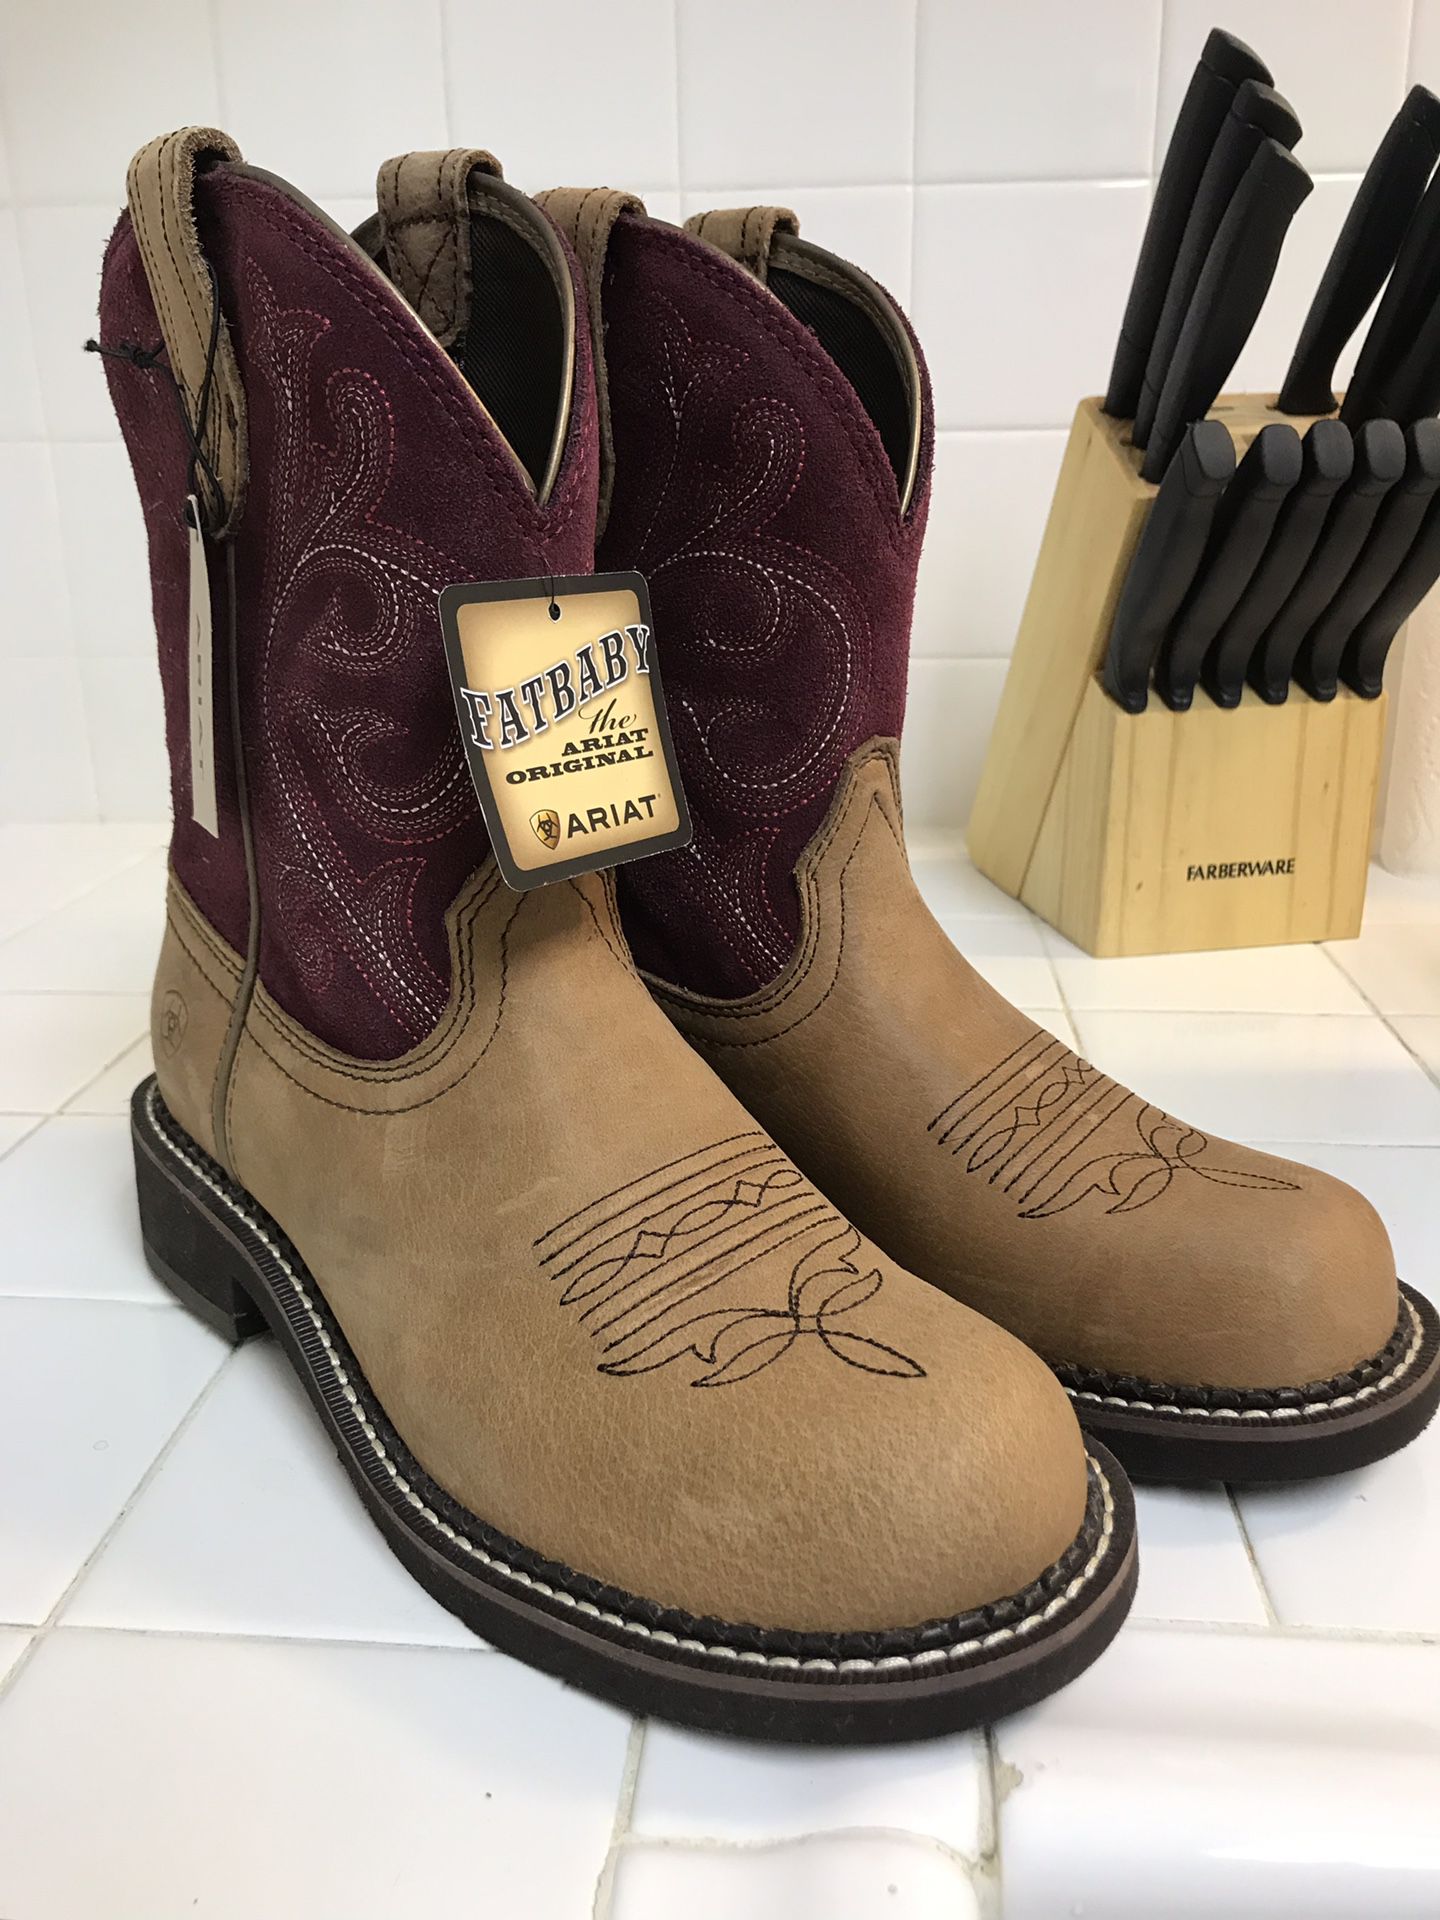 Brand New Women’s Ariat Boots Size 8 1/2